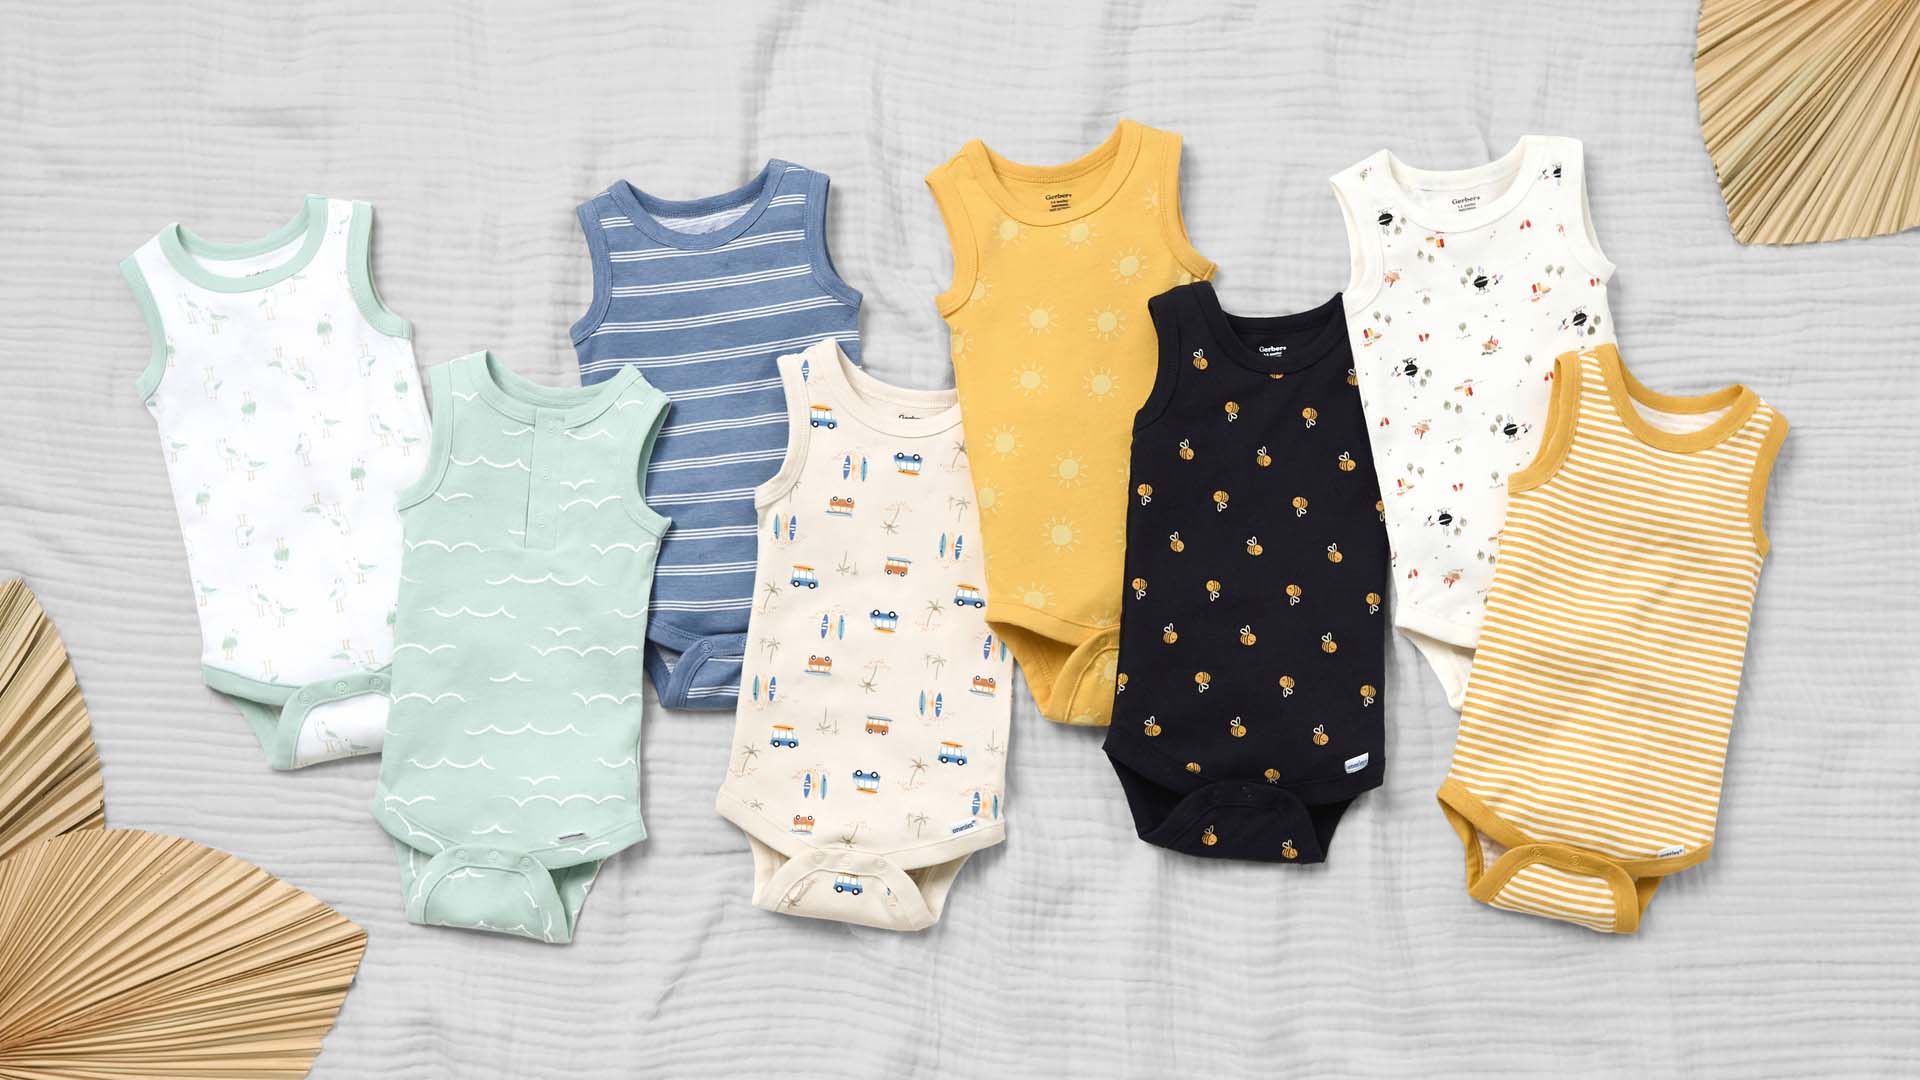 Assortment of baby bodysuits in various colors and patterns displayed on a textured background.